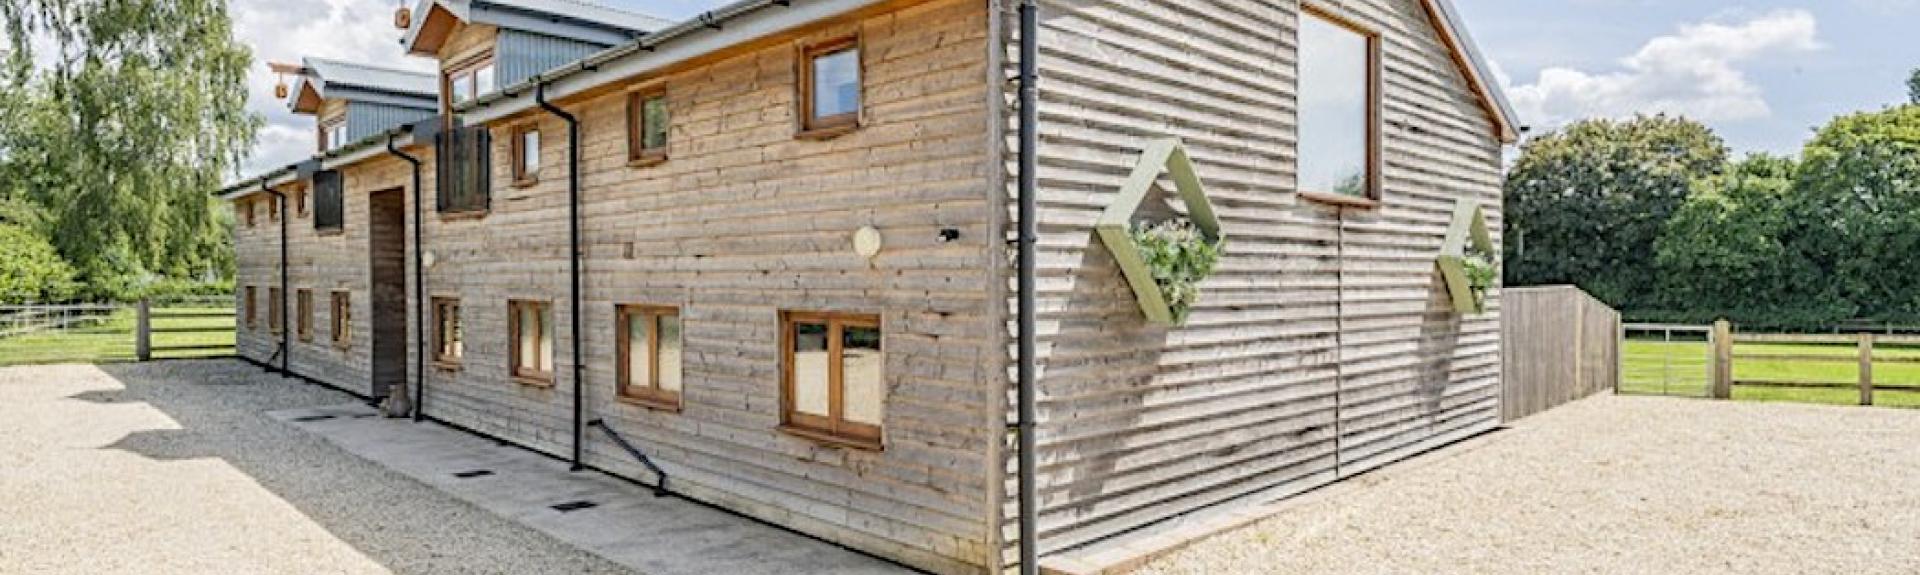 Exterior of a contemporary wood-clad barn conversion comprising 3 New Forest holiday cottages